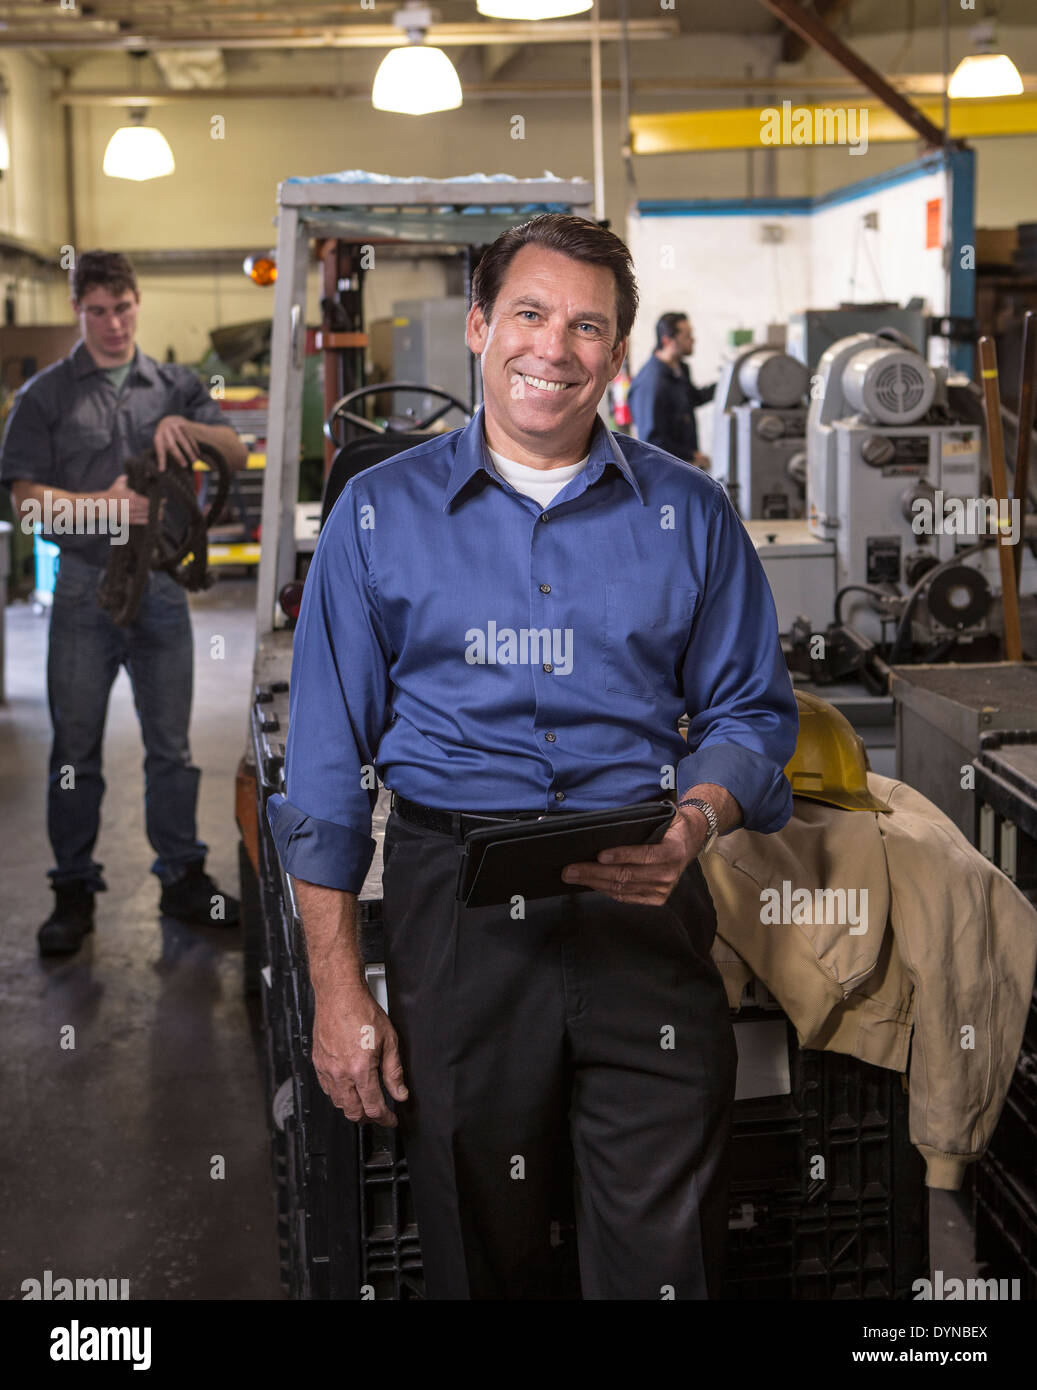 Manager using digital tablet in warehouse Stock Photo